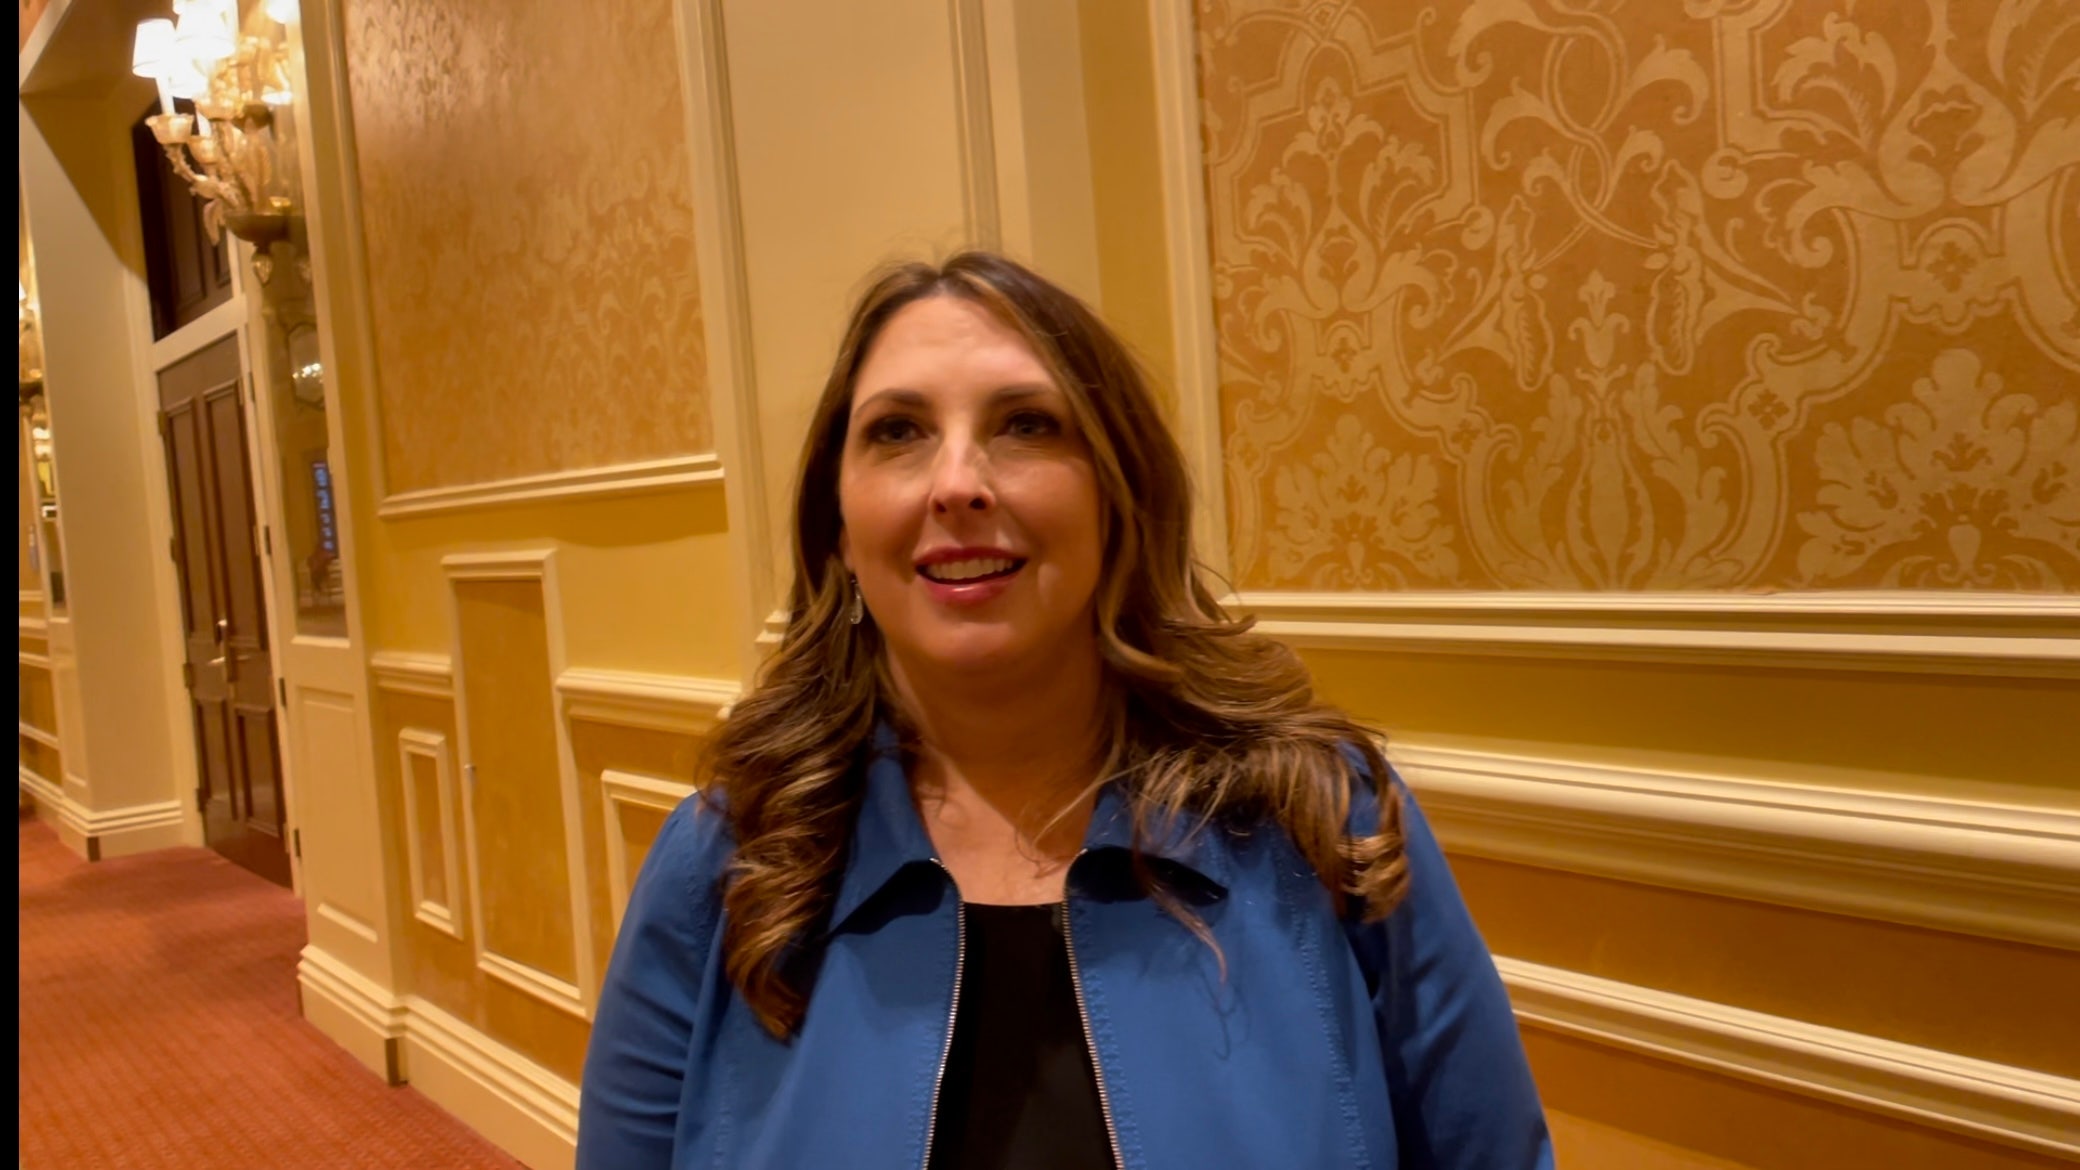 RNC chair Ronna McDaniel says ‘successful’ Virginia get-out-the-vote effort a ‘test run’ for 2022 midterms